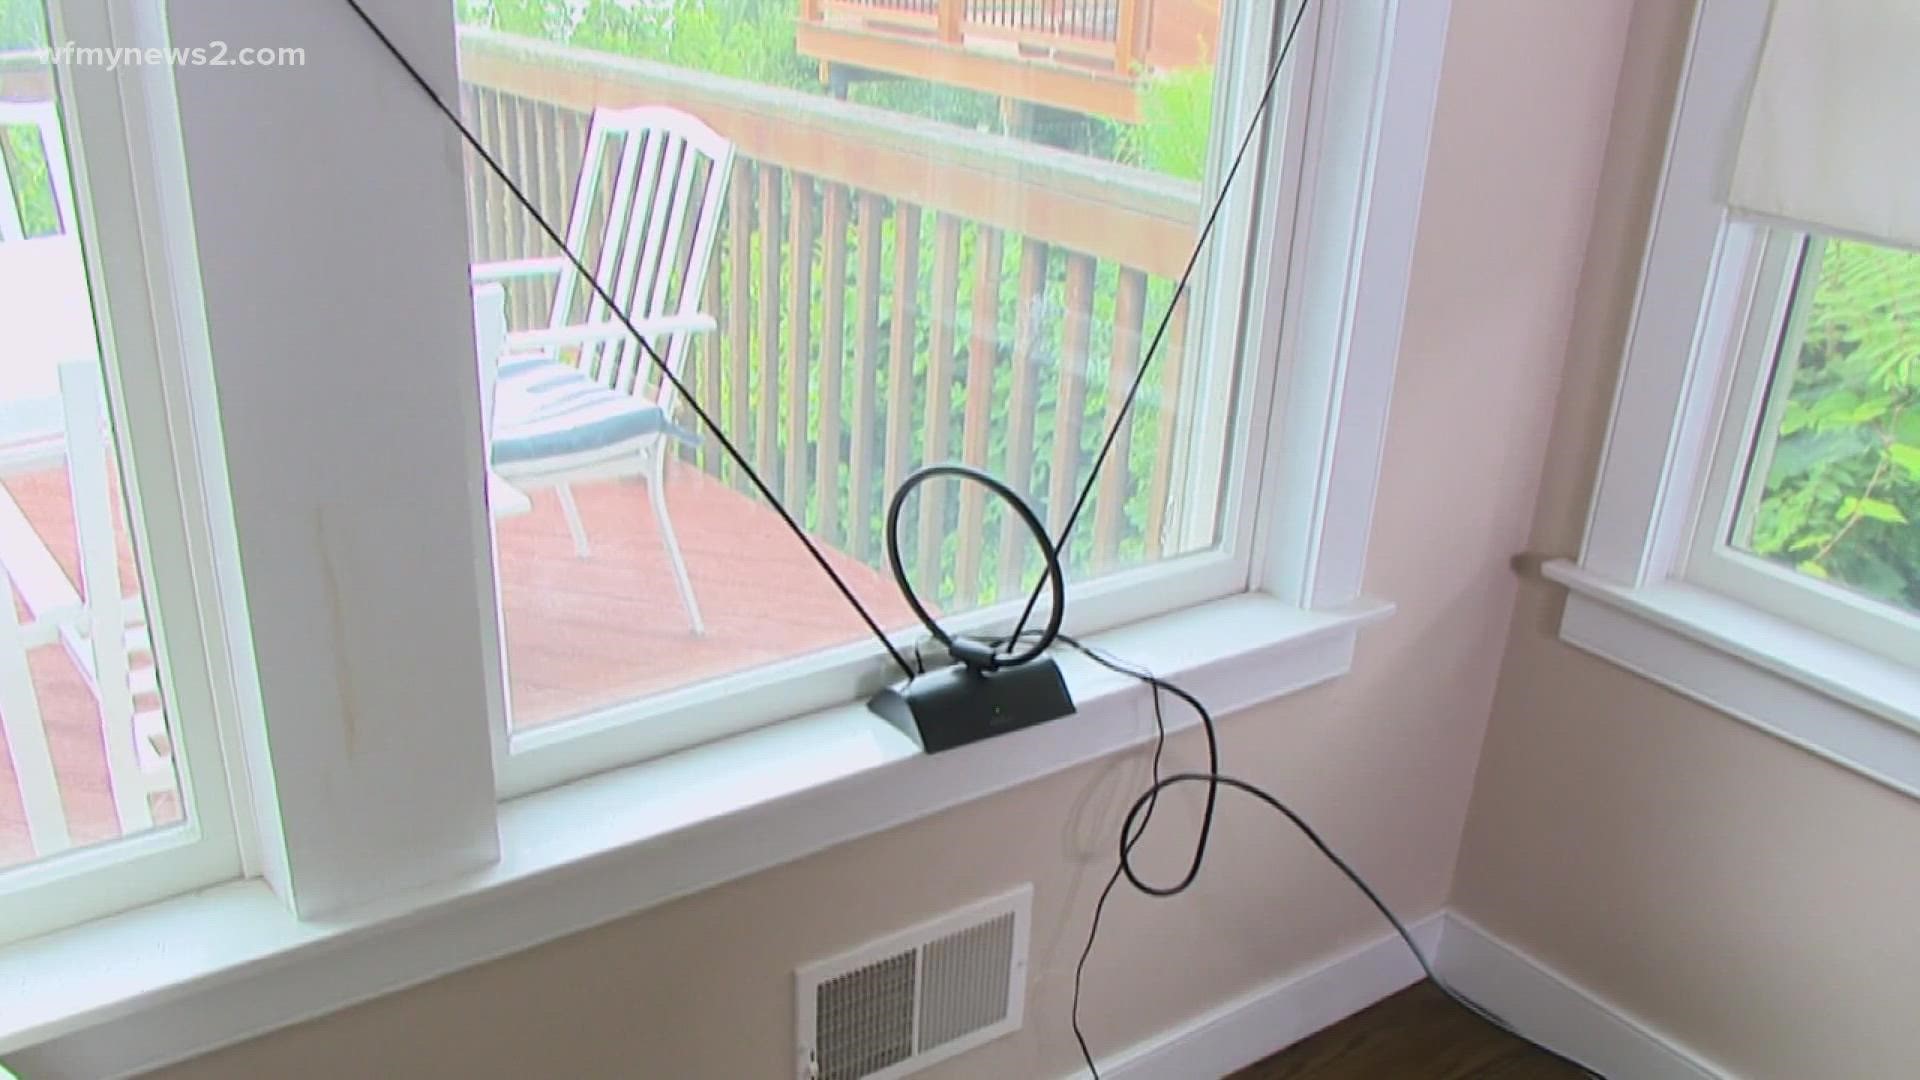 Consumer Reports recently tested indoor antennas of different shapes and sizes in homes both in the city and in the suburbs.